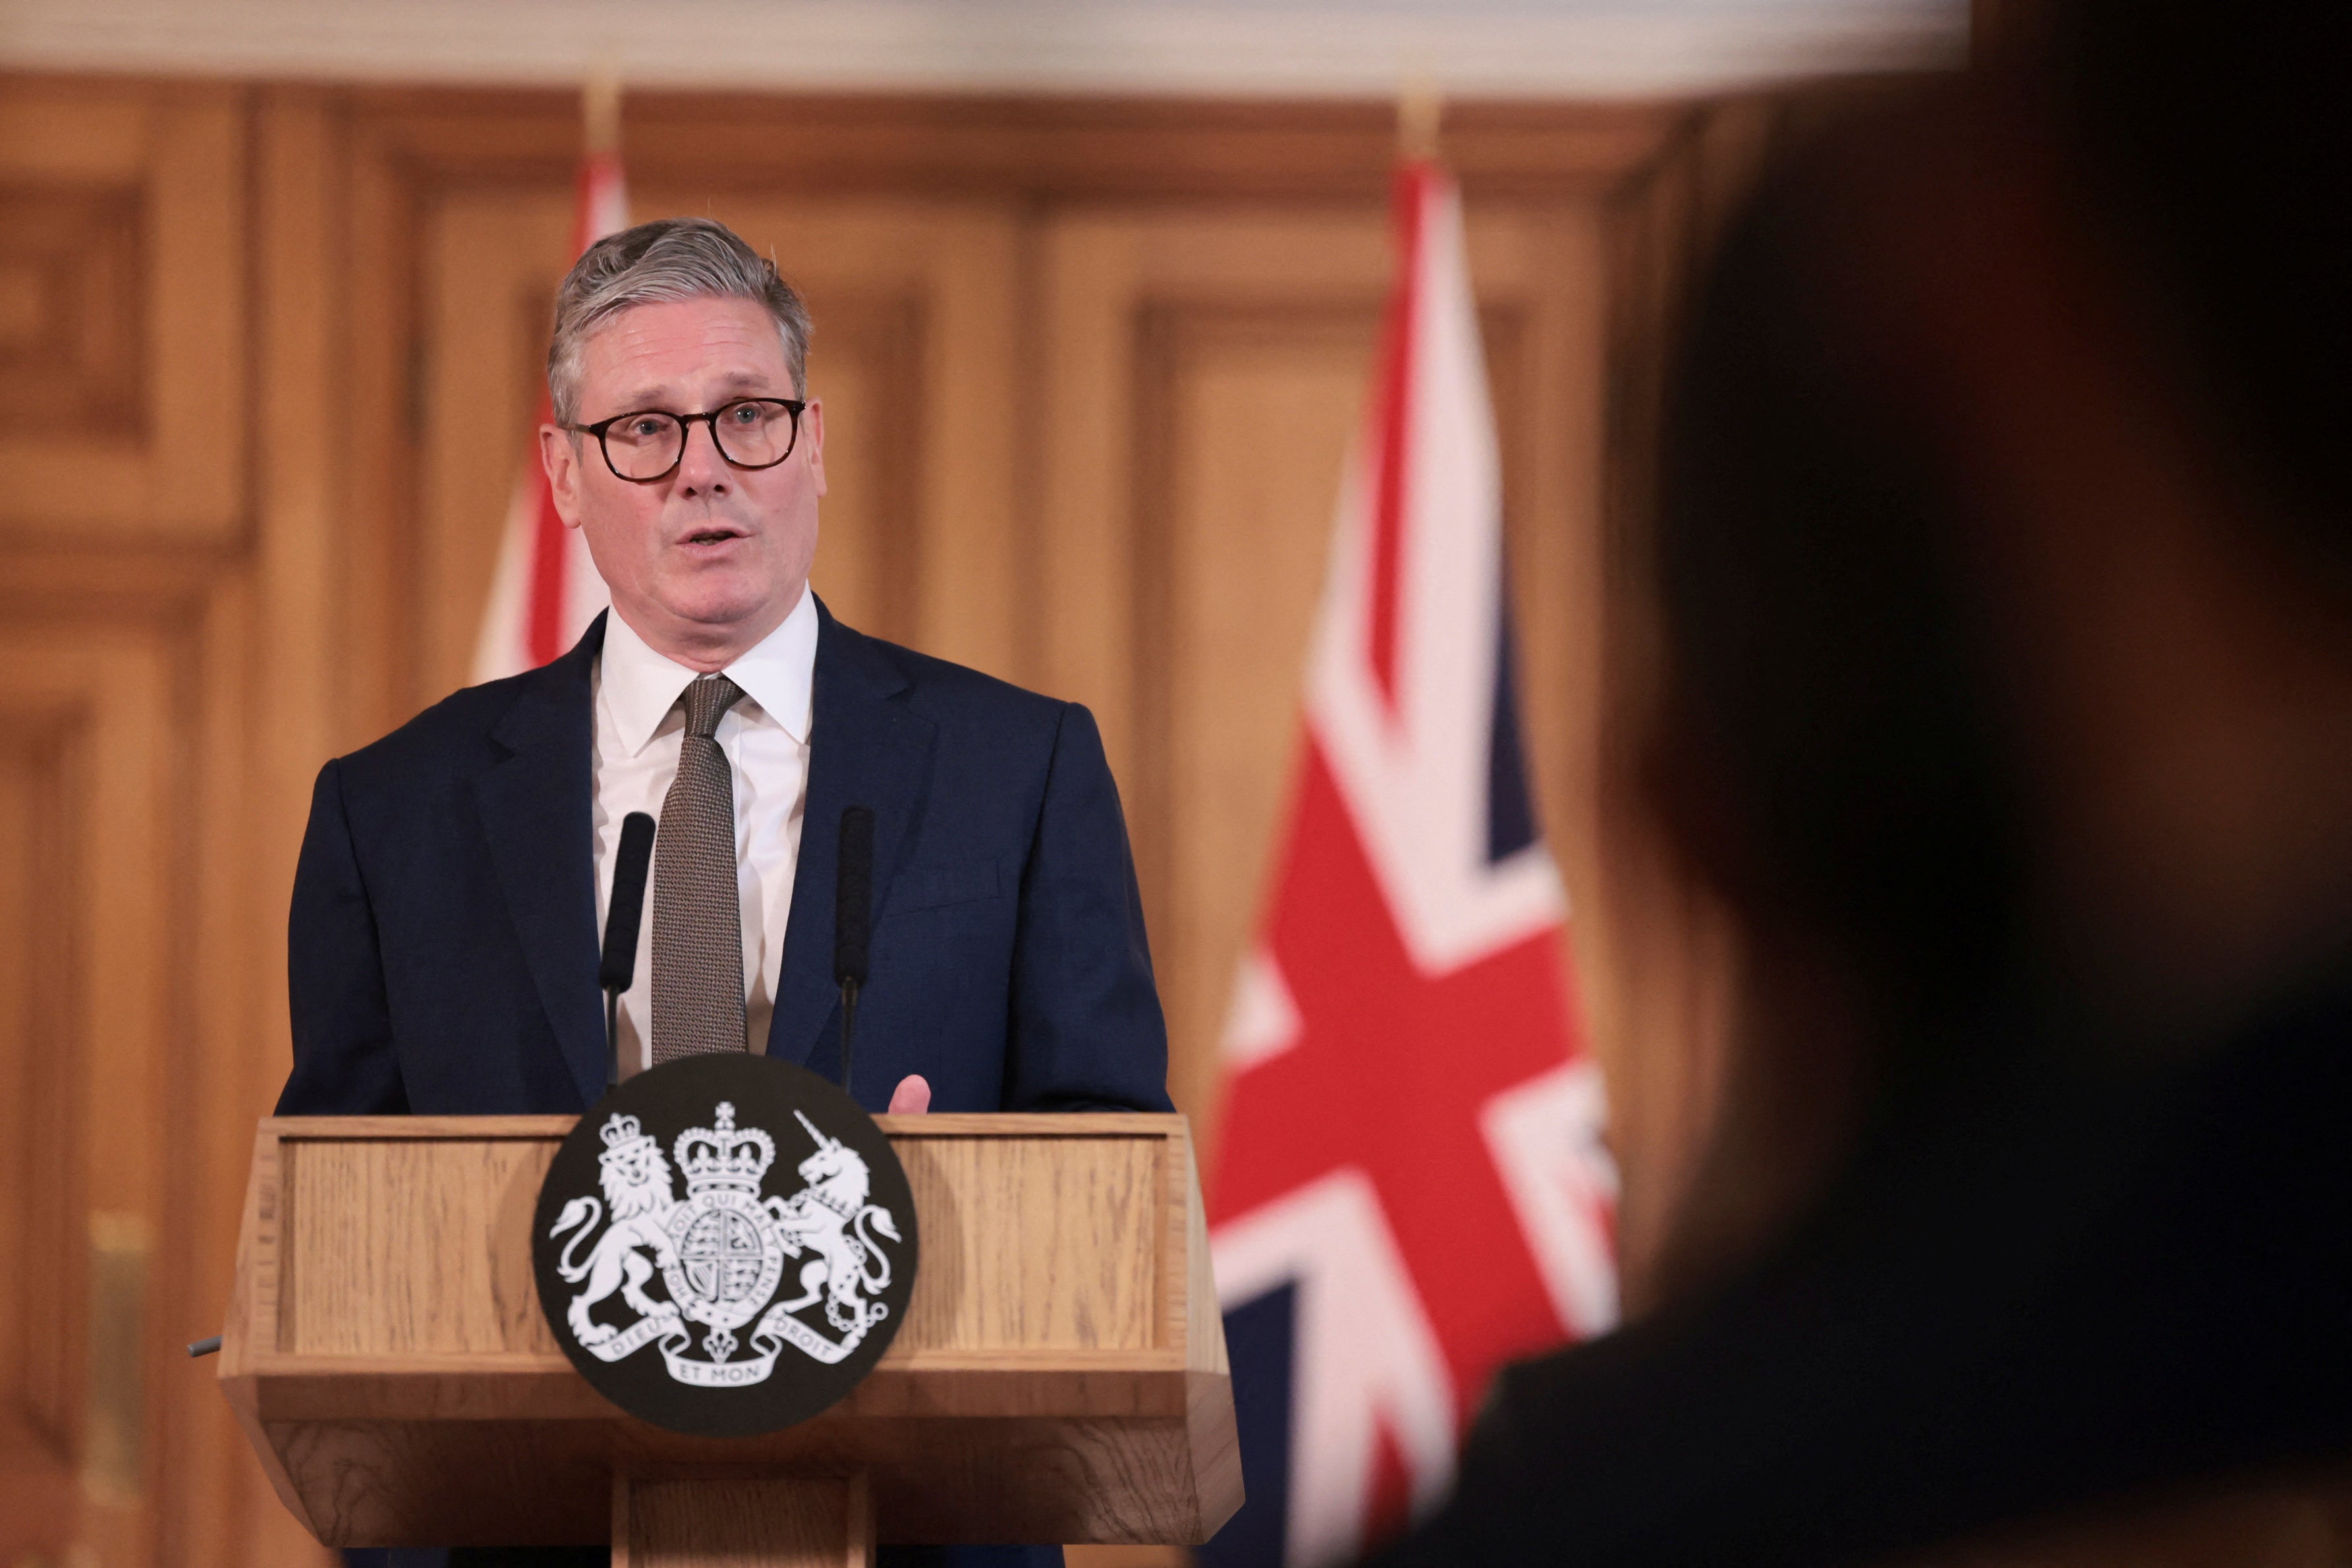 Prime Minister Sir Keir Starmer speaks during a press conference after his first Cabinet meeting at 10 Downing Street, London (Claudia Greco, PA)